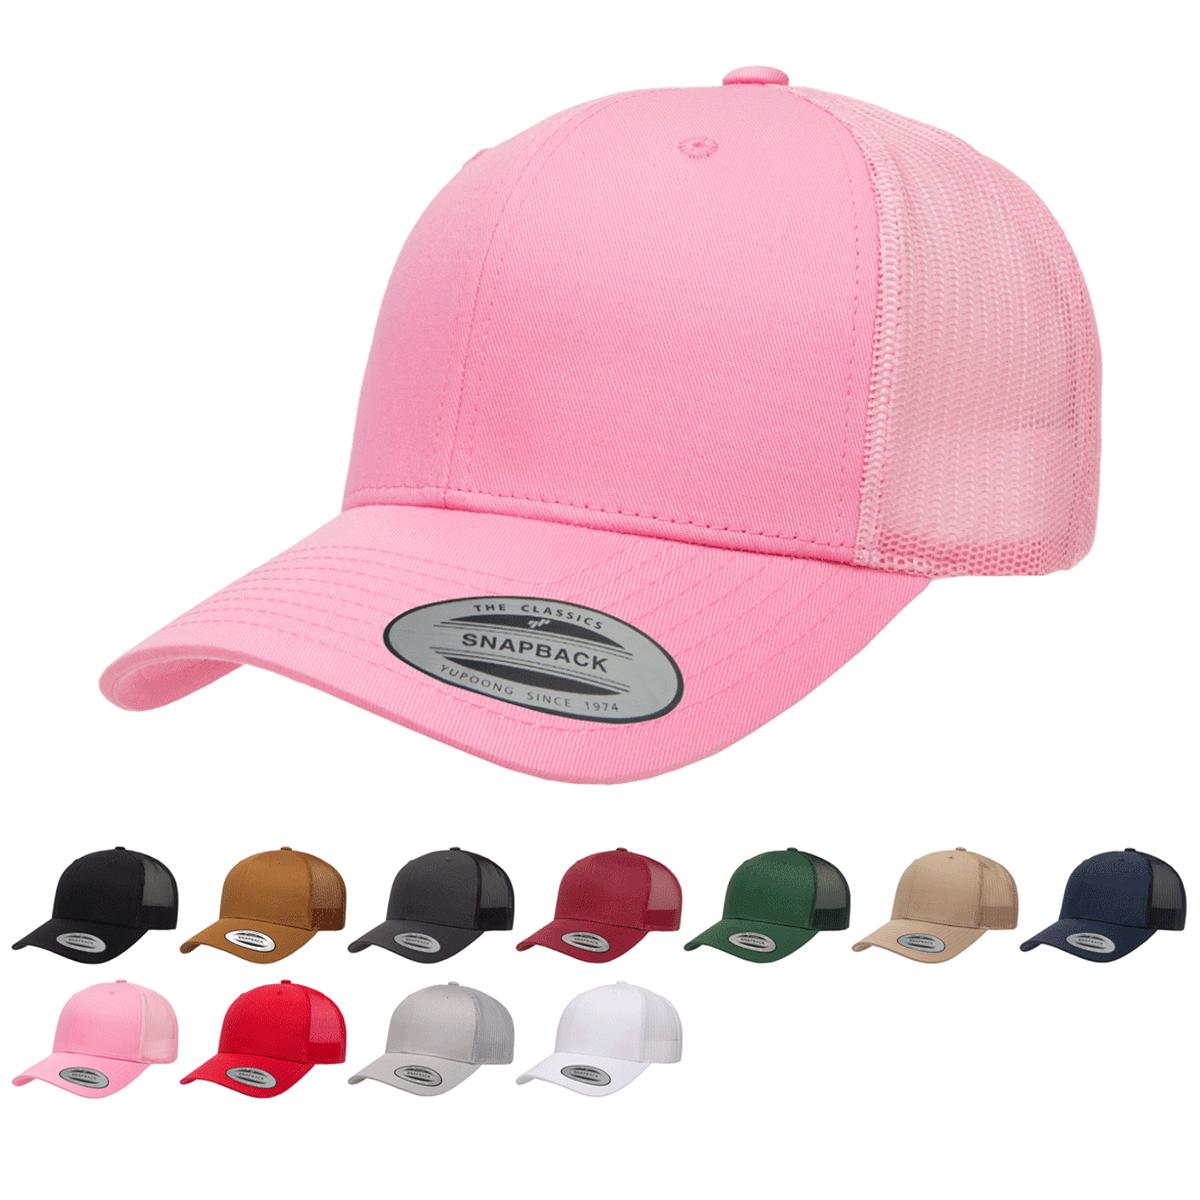 YP Class Wholesale – Retro with Back Hat, Yupoong 6606 Trucker The Park Mesh Cap Baseball -